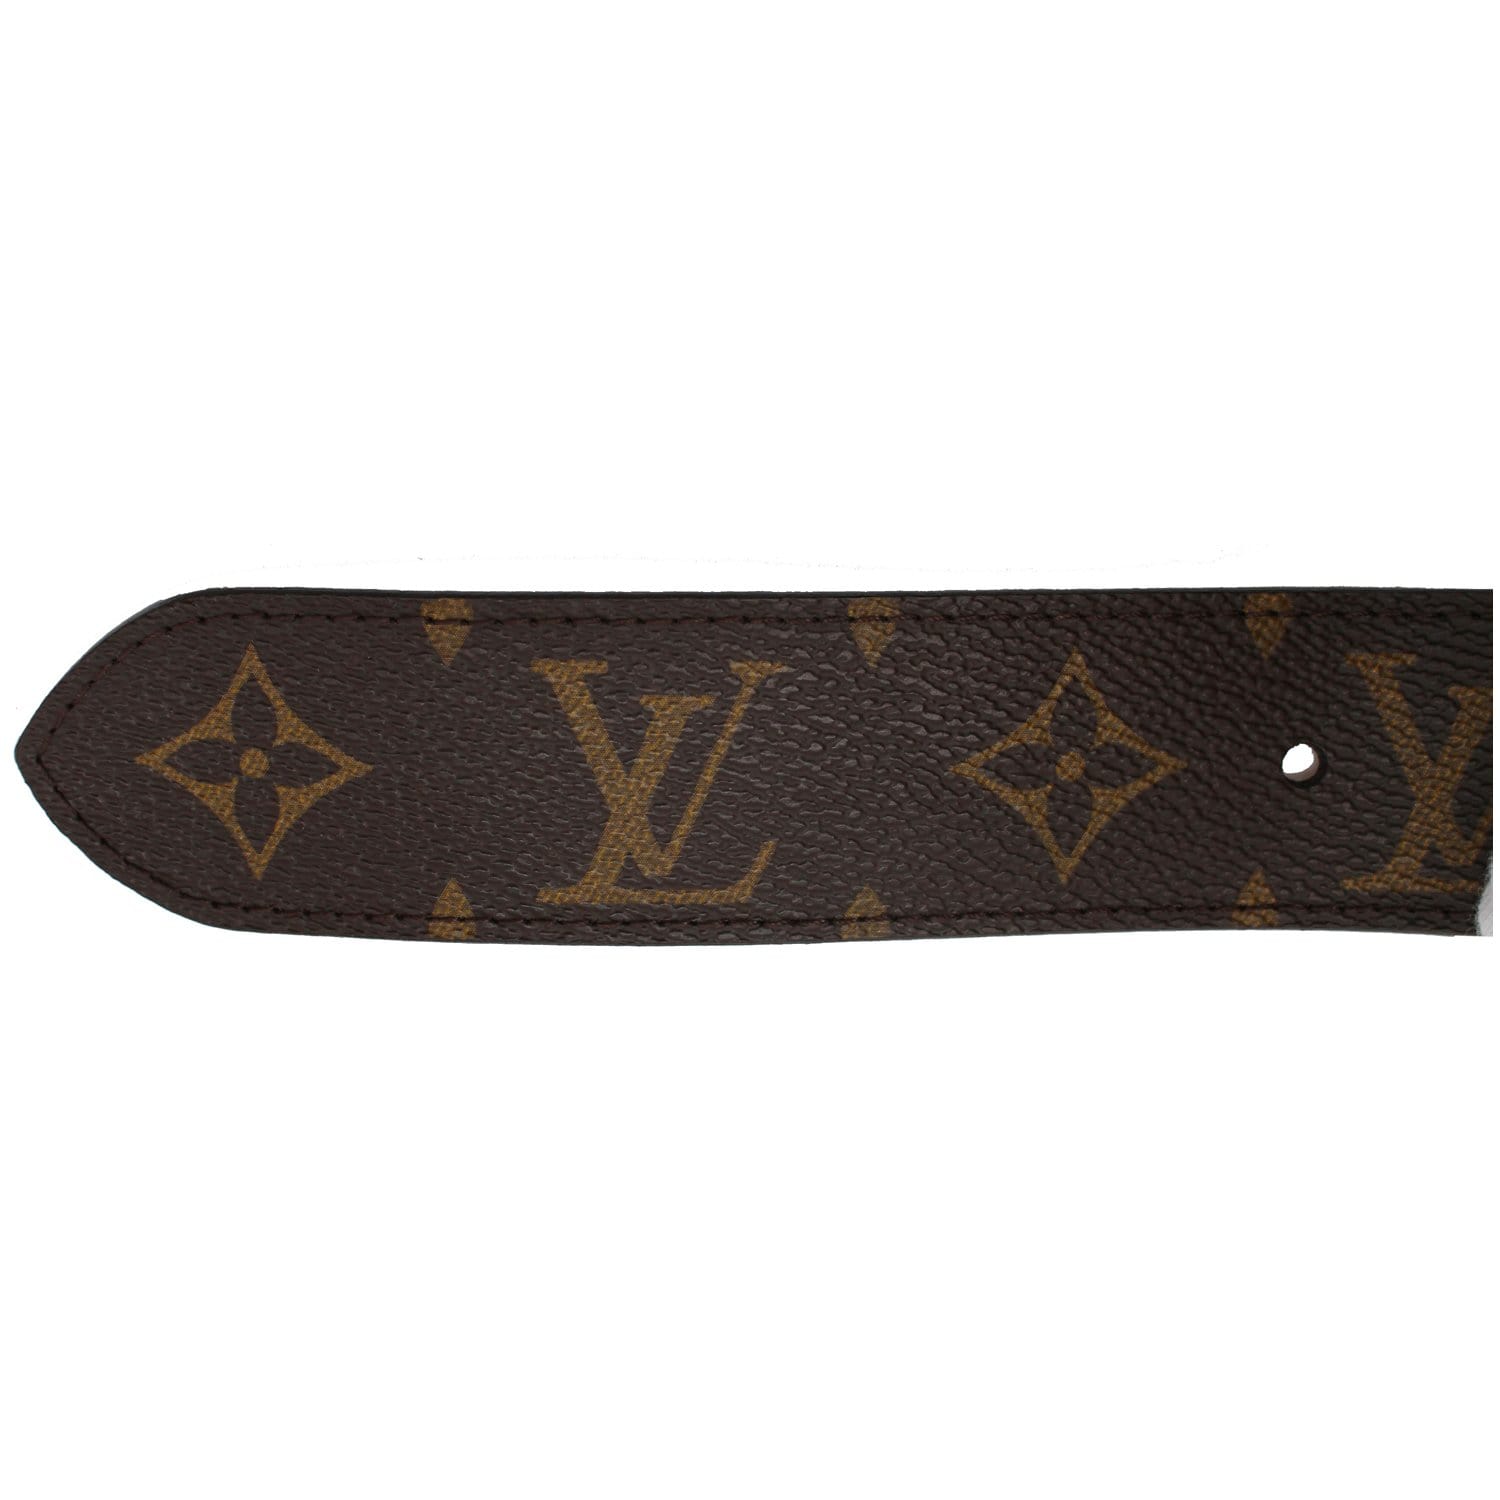 Lv circle leather belt Louis Vuitton Brown size 80 cm in Leather - 31325513